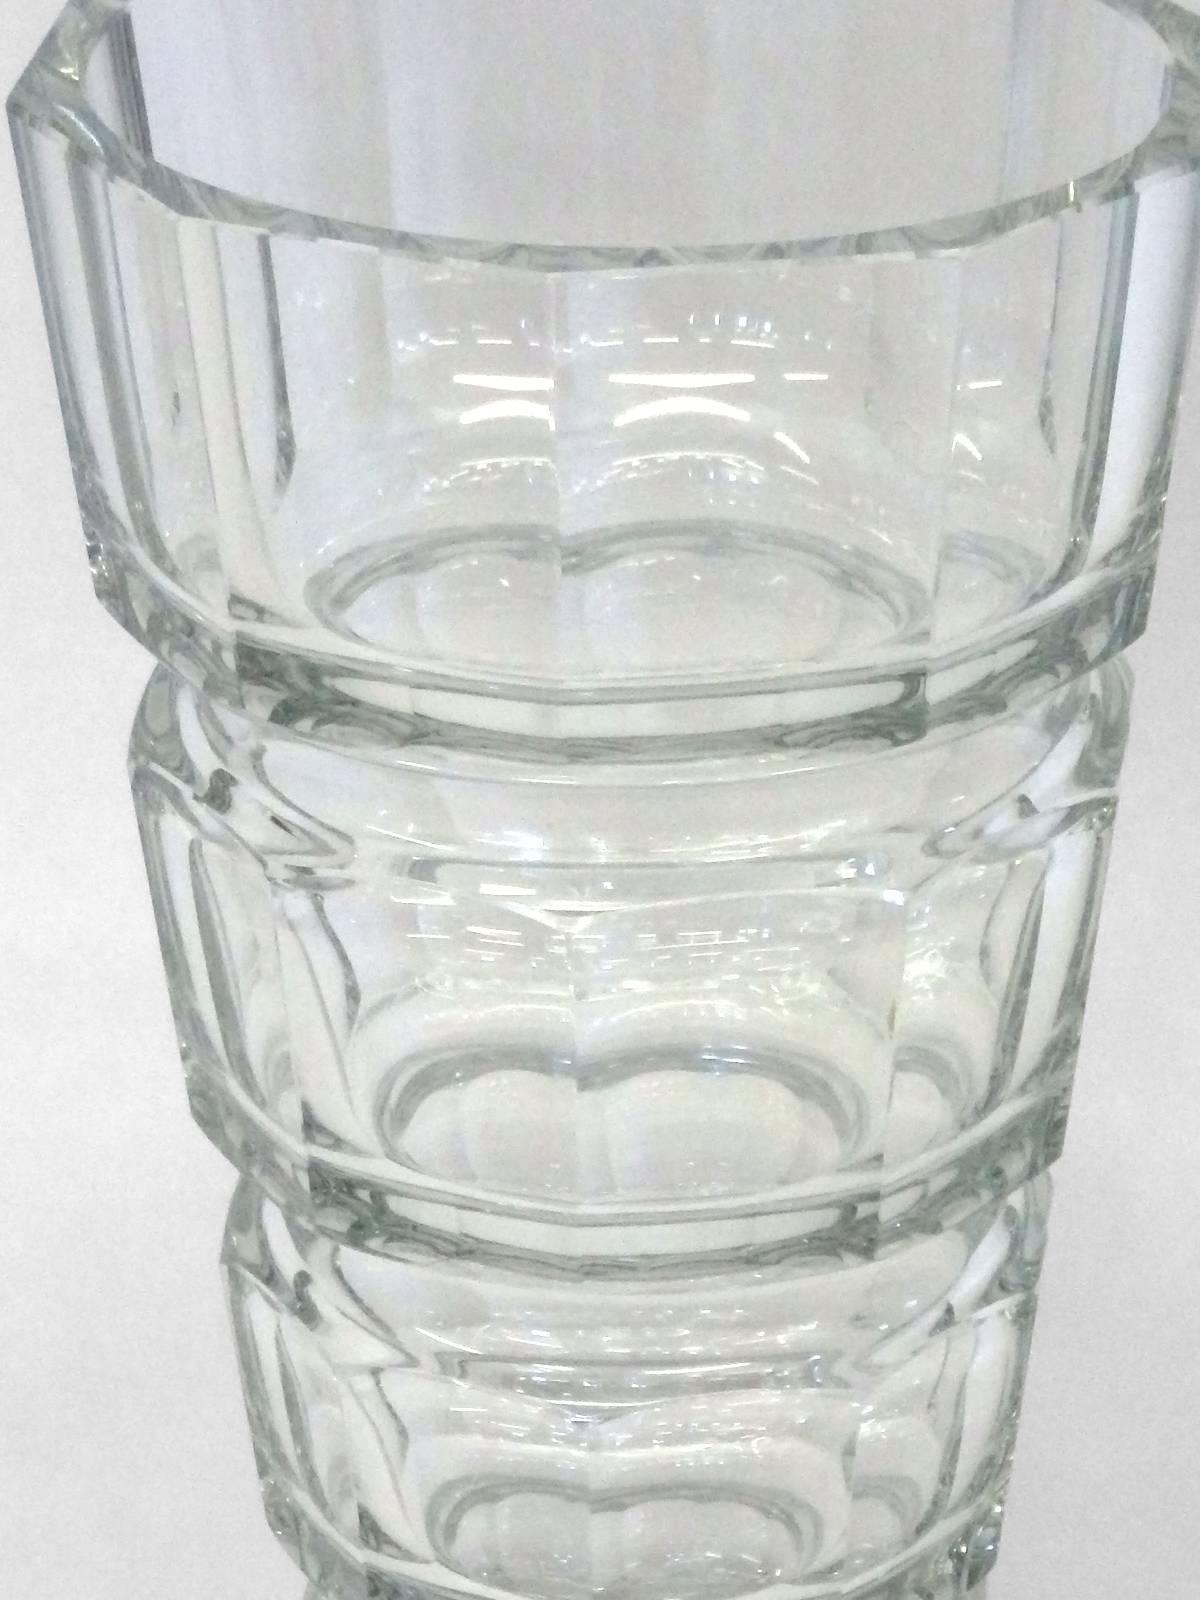 Josef Hoffmann designed crystal glass vase. Attributed to Moser.
Measures: 6.75 diameter (opening) x 12 tall.